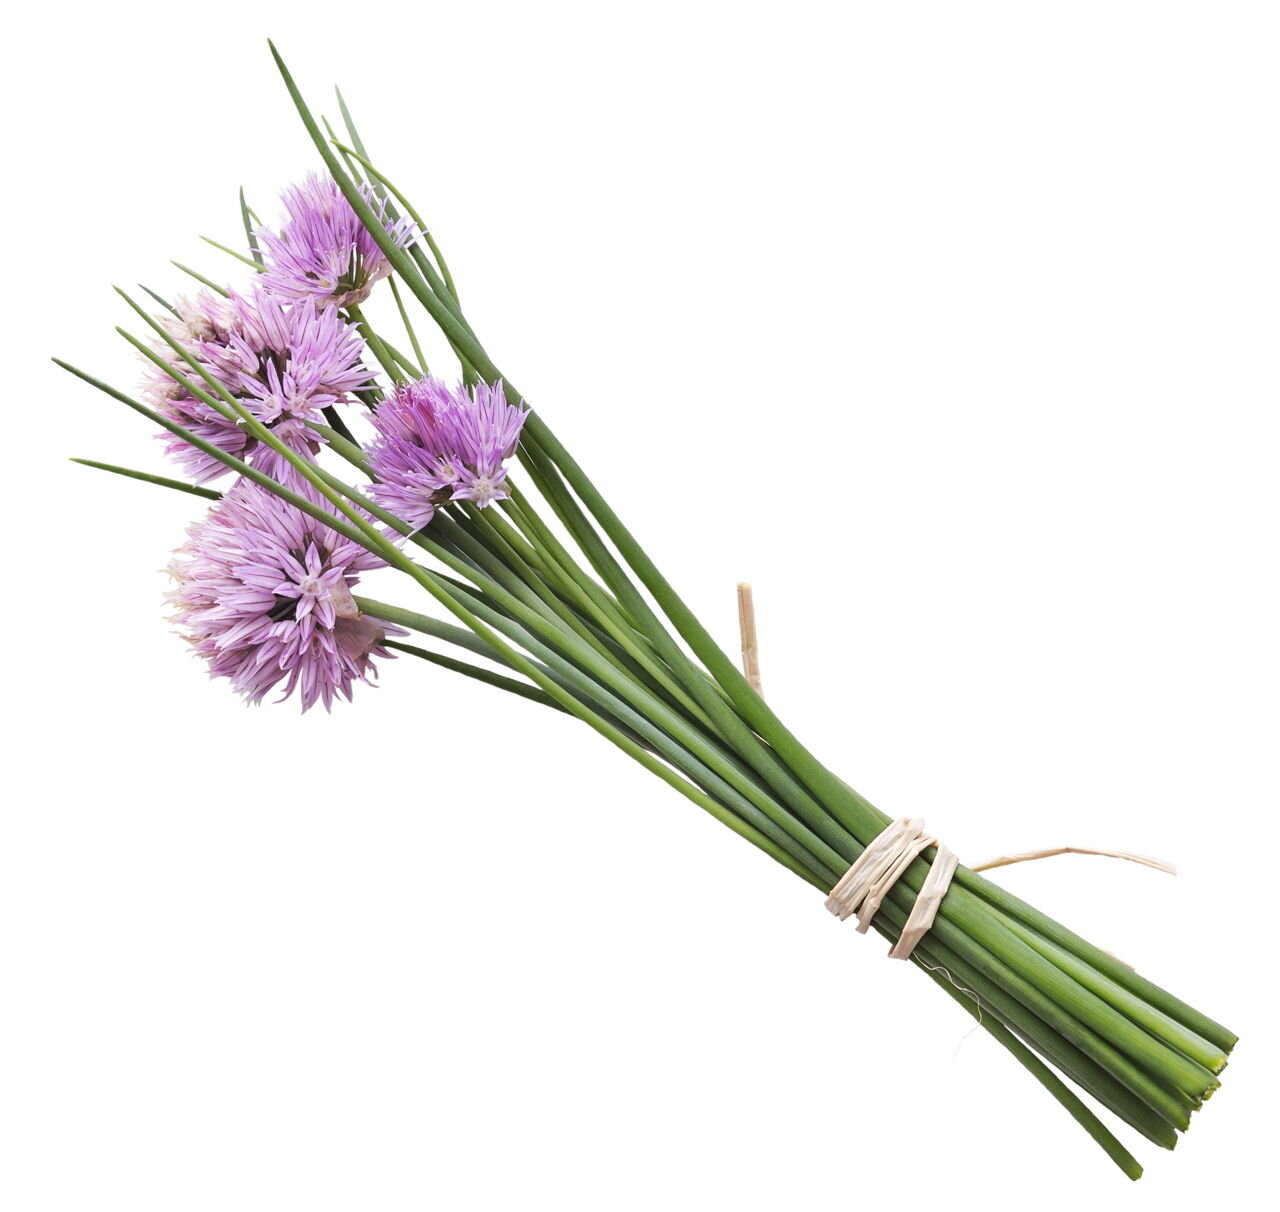 1280-503030695-chives-with-flowers.jpg